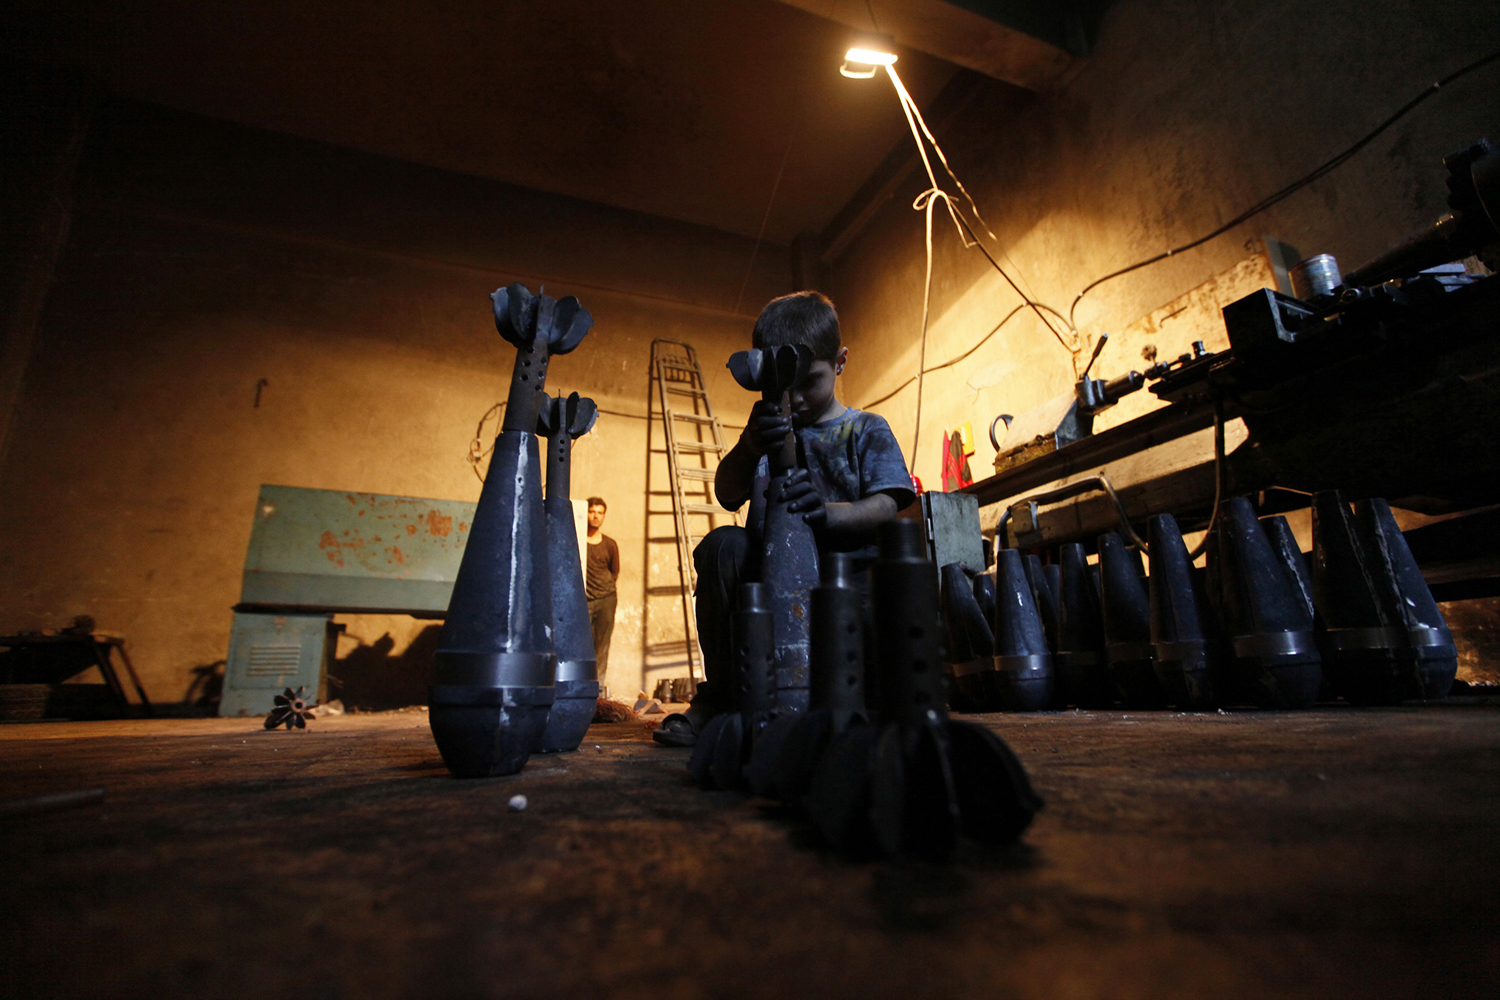 Issa assembles a locally handmade mortar shell in a weapons factory of the Free Syrian Army in Aleppo